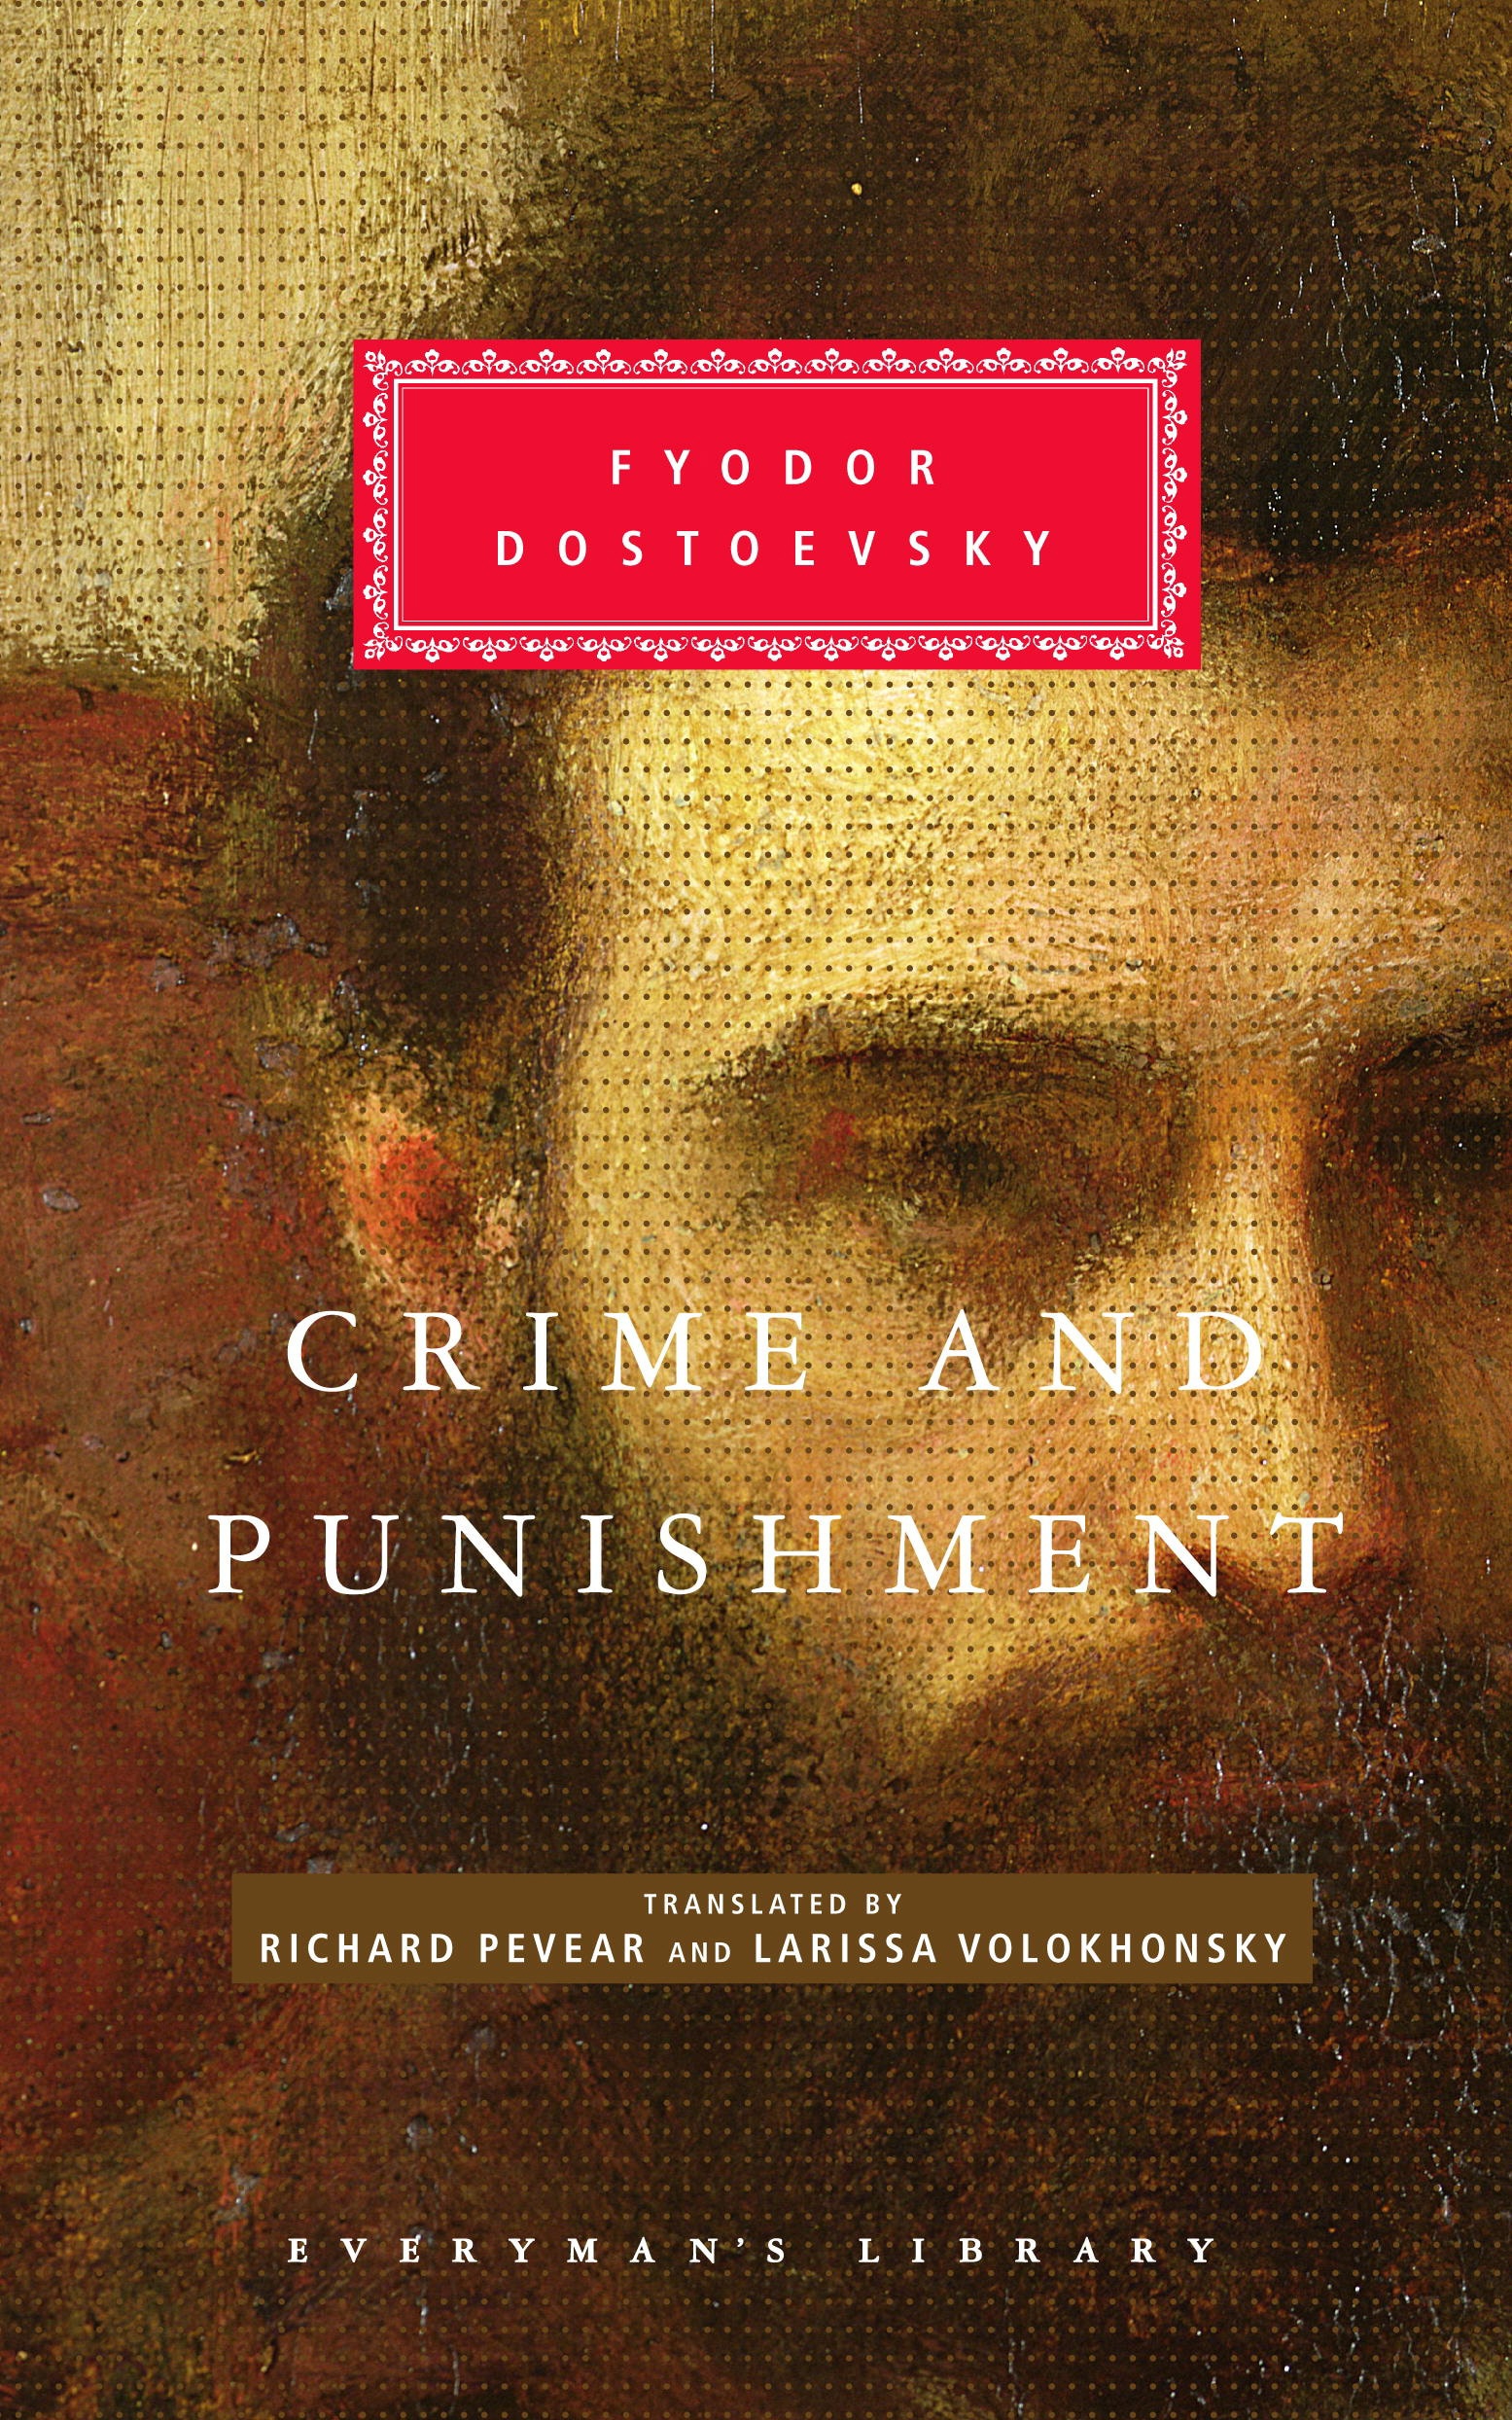 Book “Crime And Punishment” by Fyodor Dostoyevsky — May 20, 1993